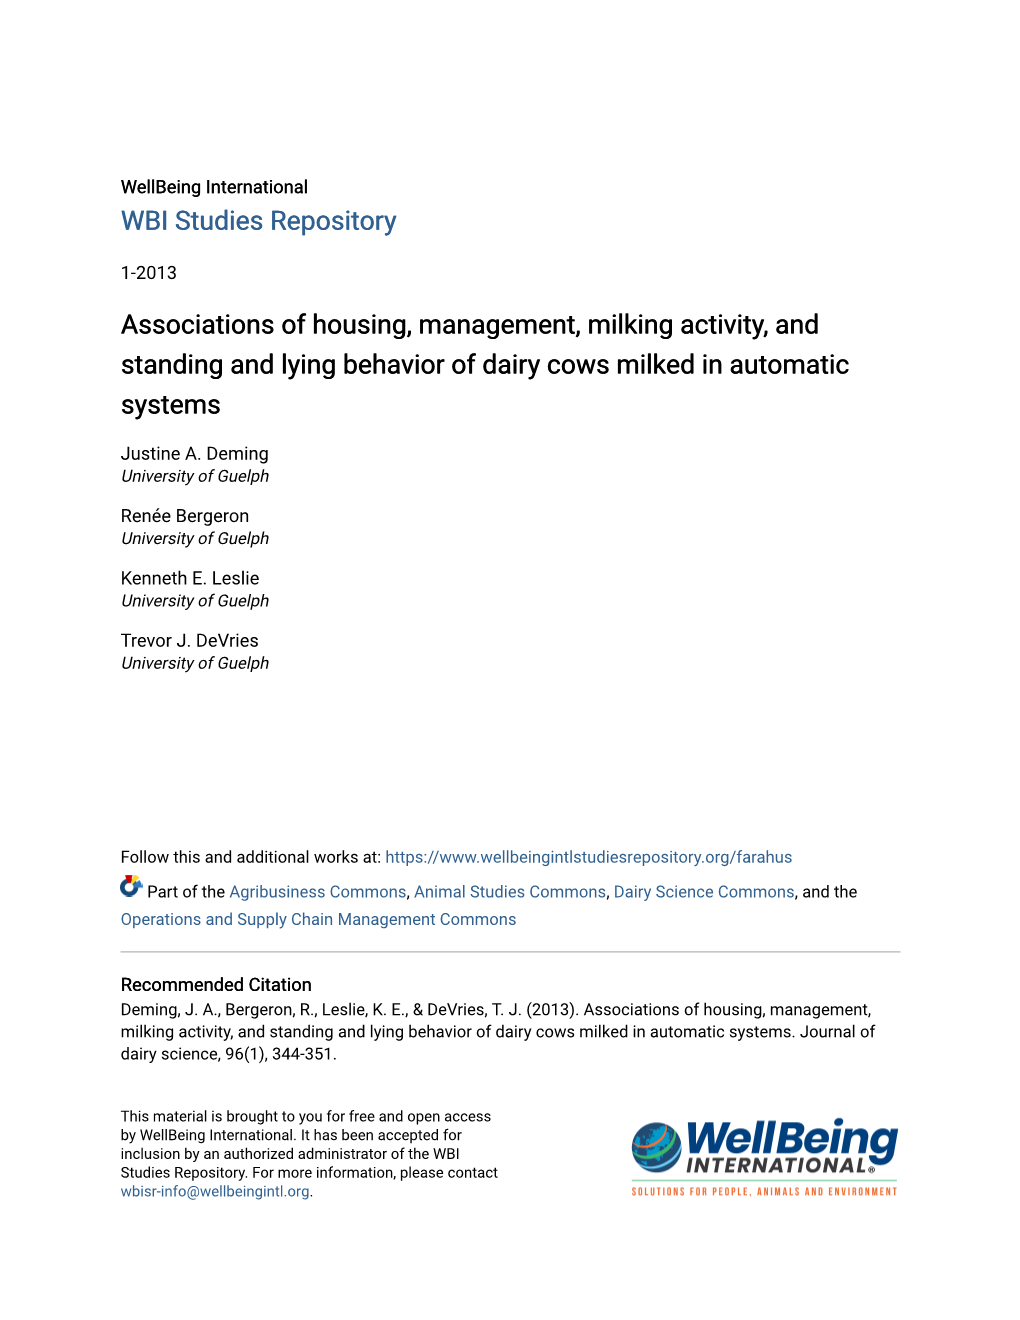 Associations of Housing, Management, Milking Activity, and Standing and Lying Behavior of Dairy Cows Milked in Automatic Systems